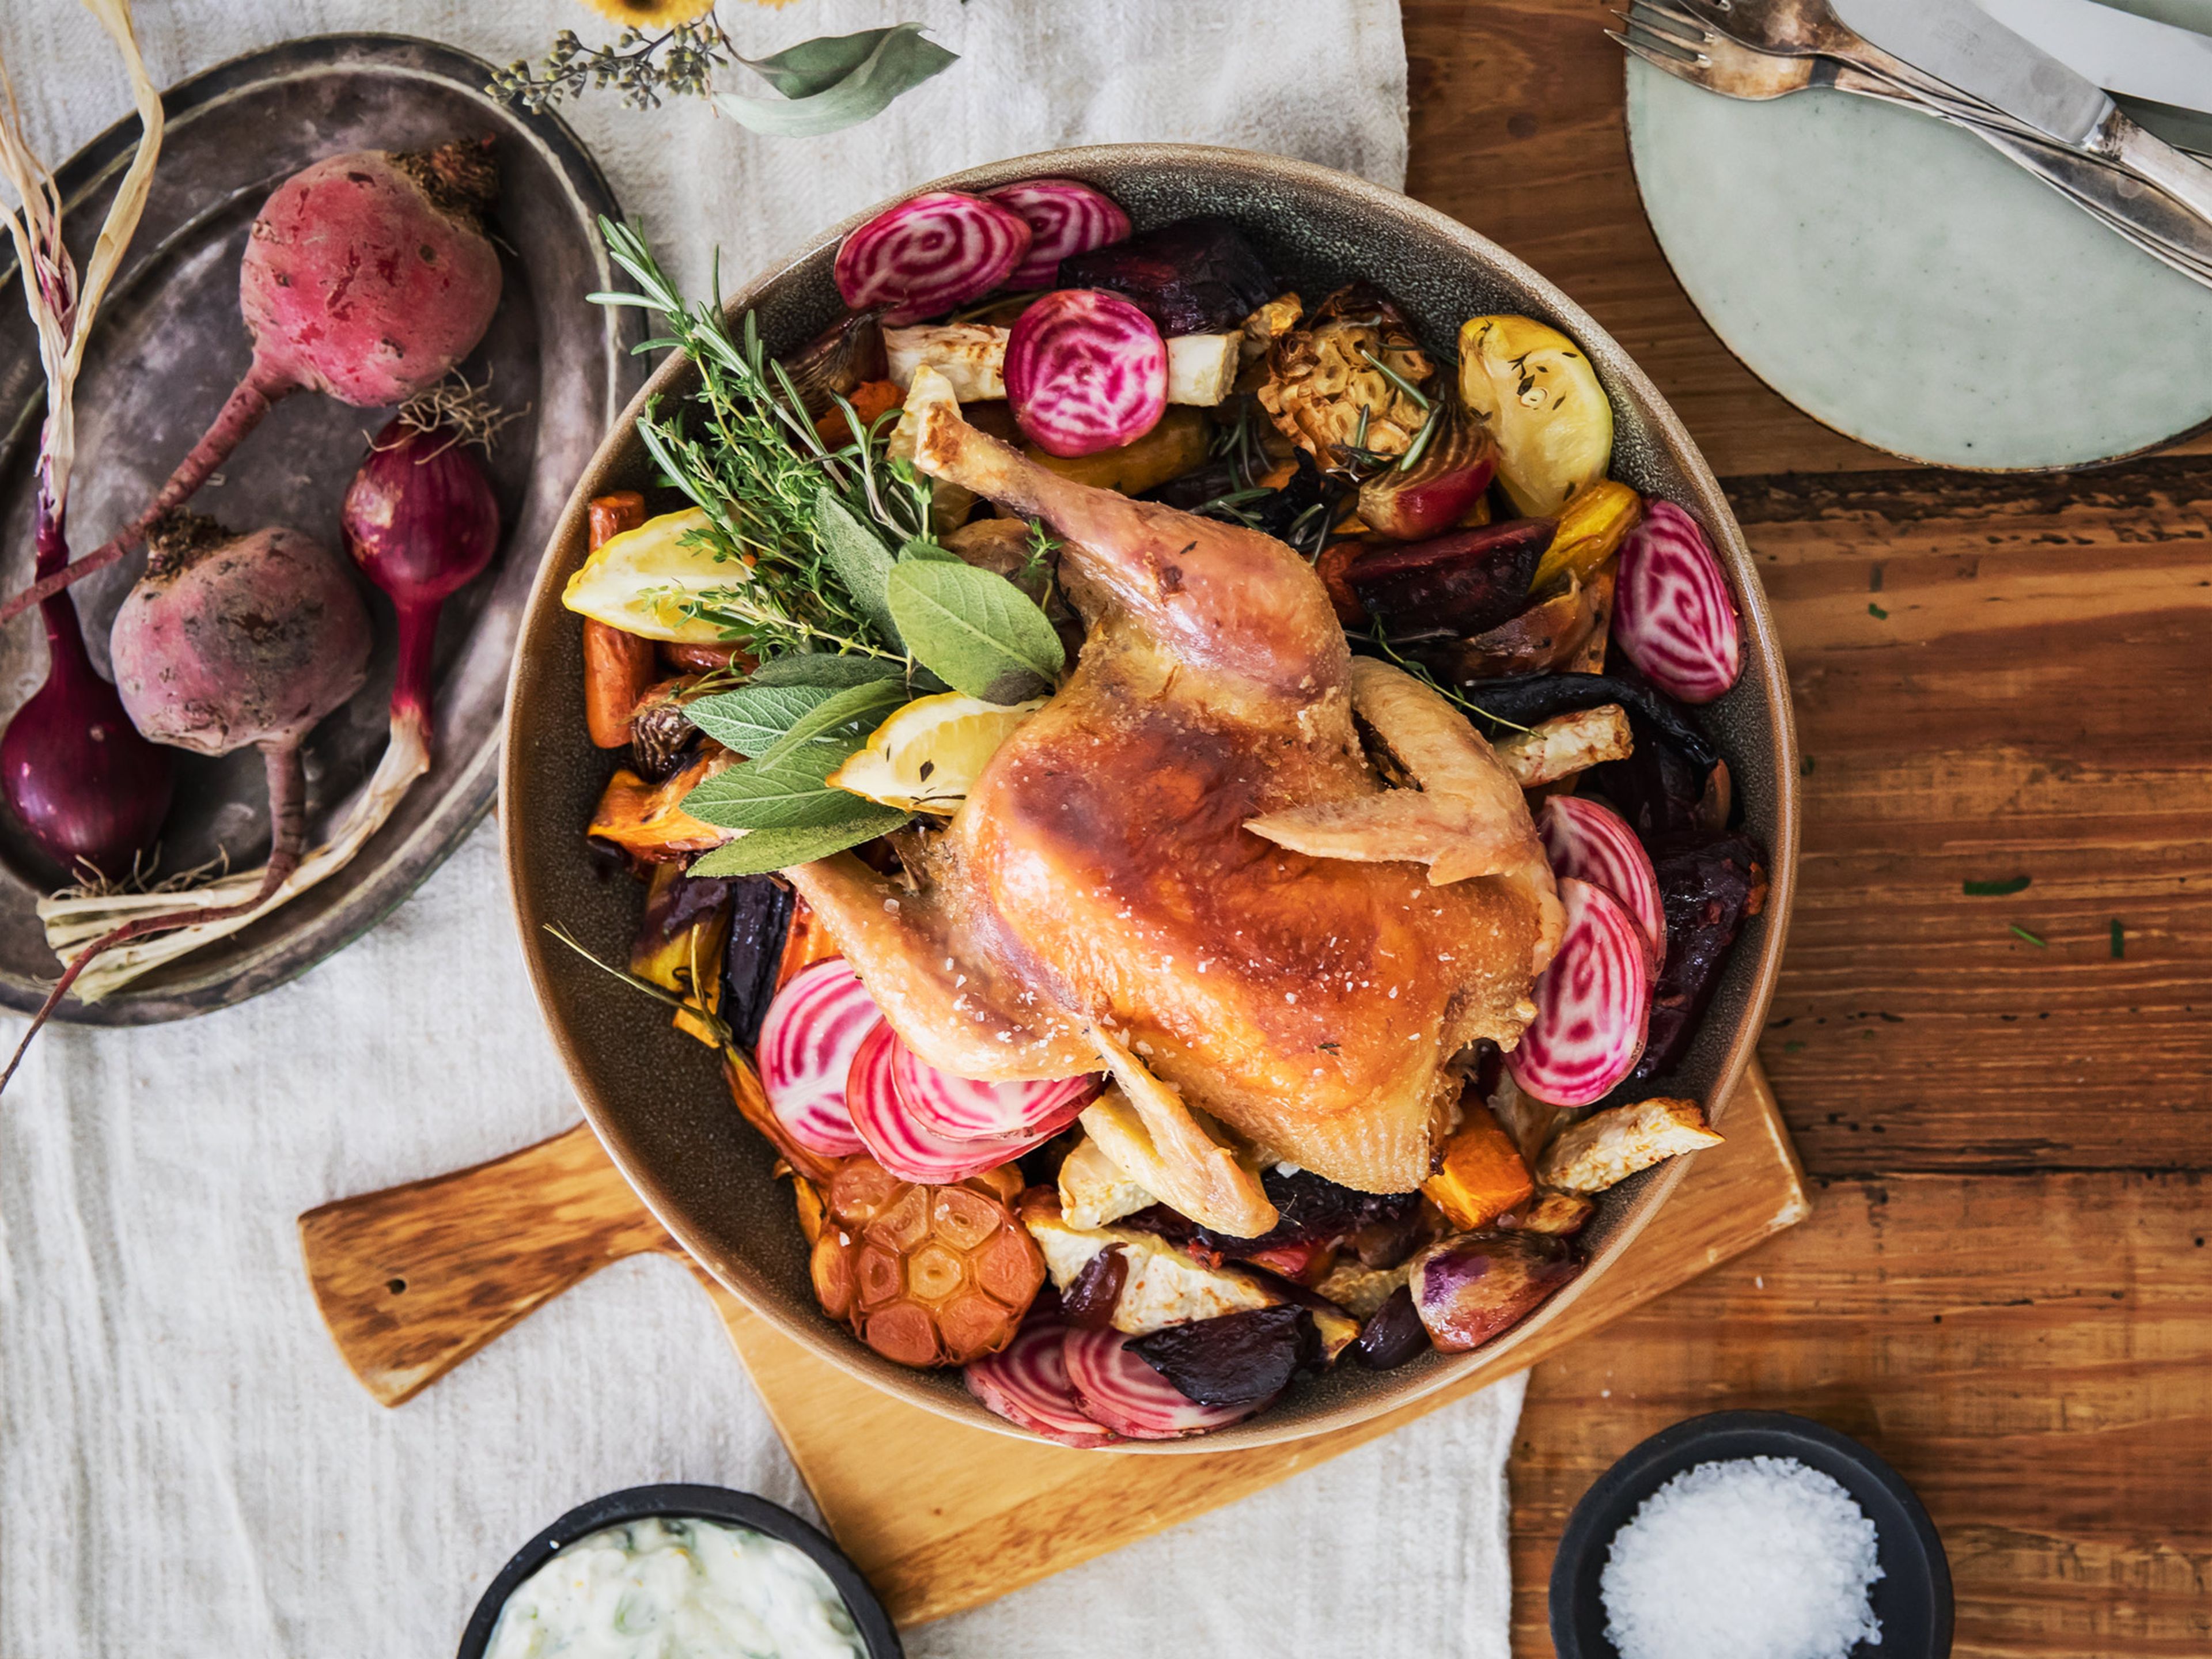 Herb-roasted chicken with root vegetables